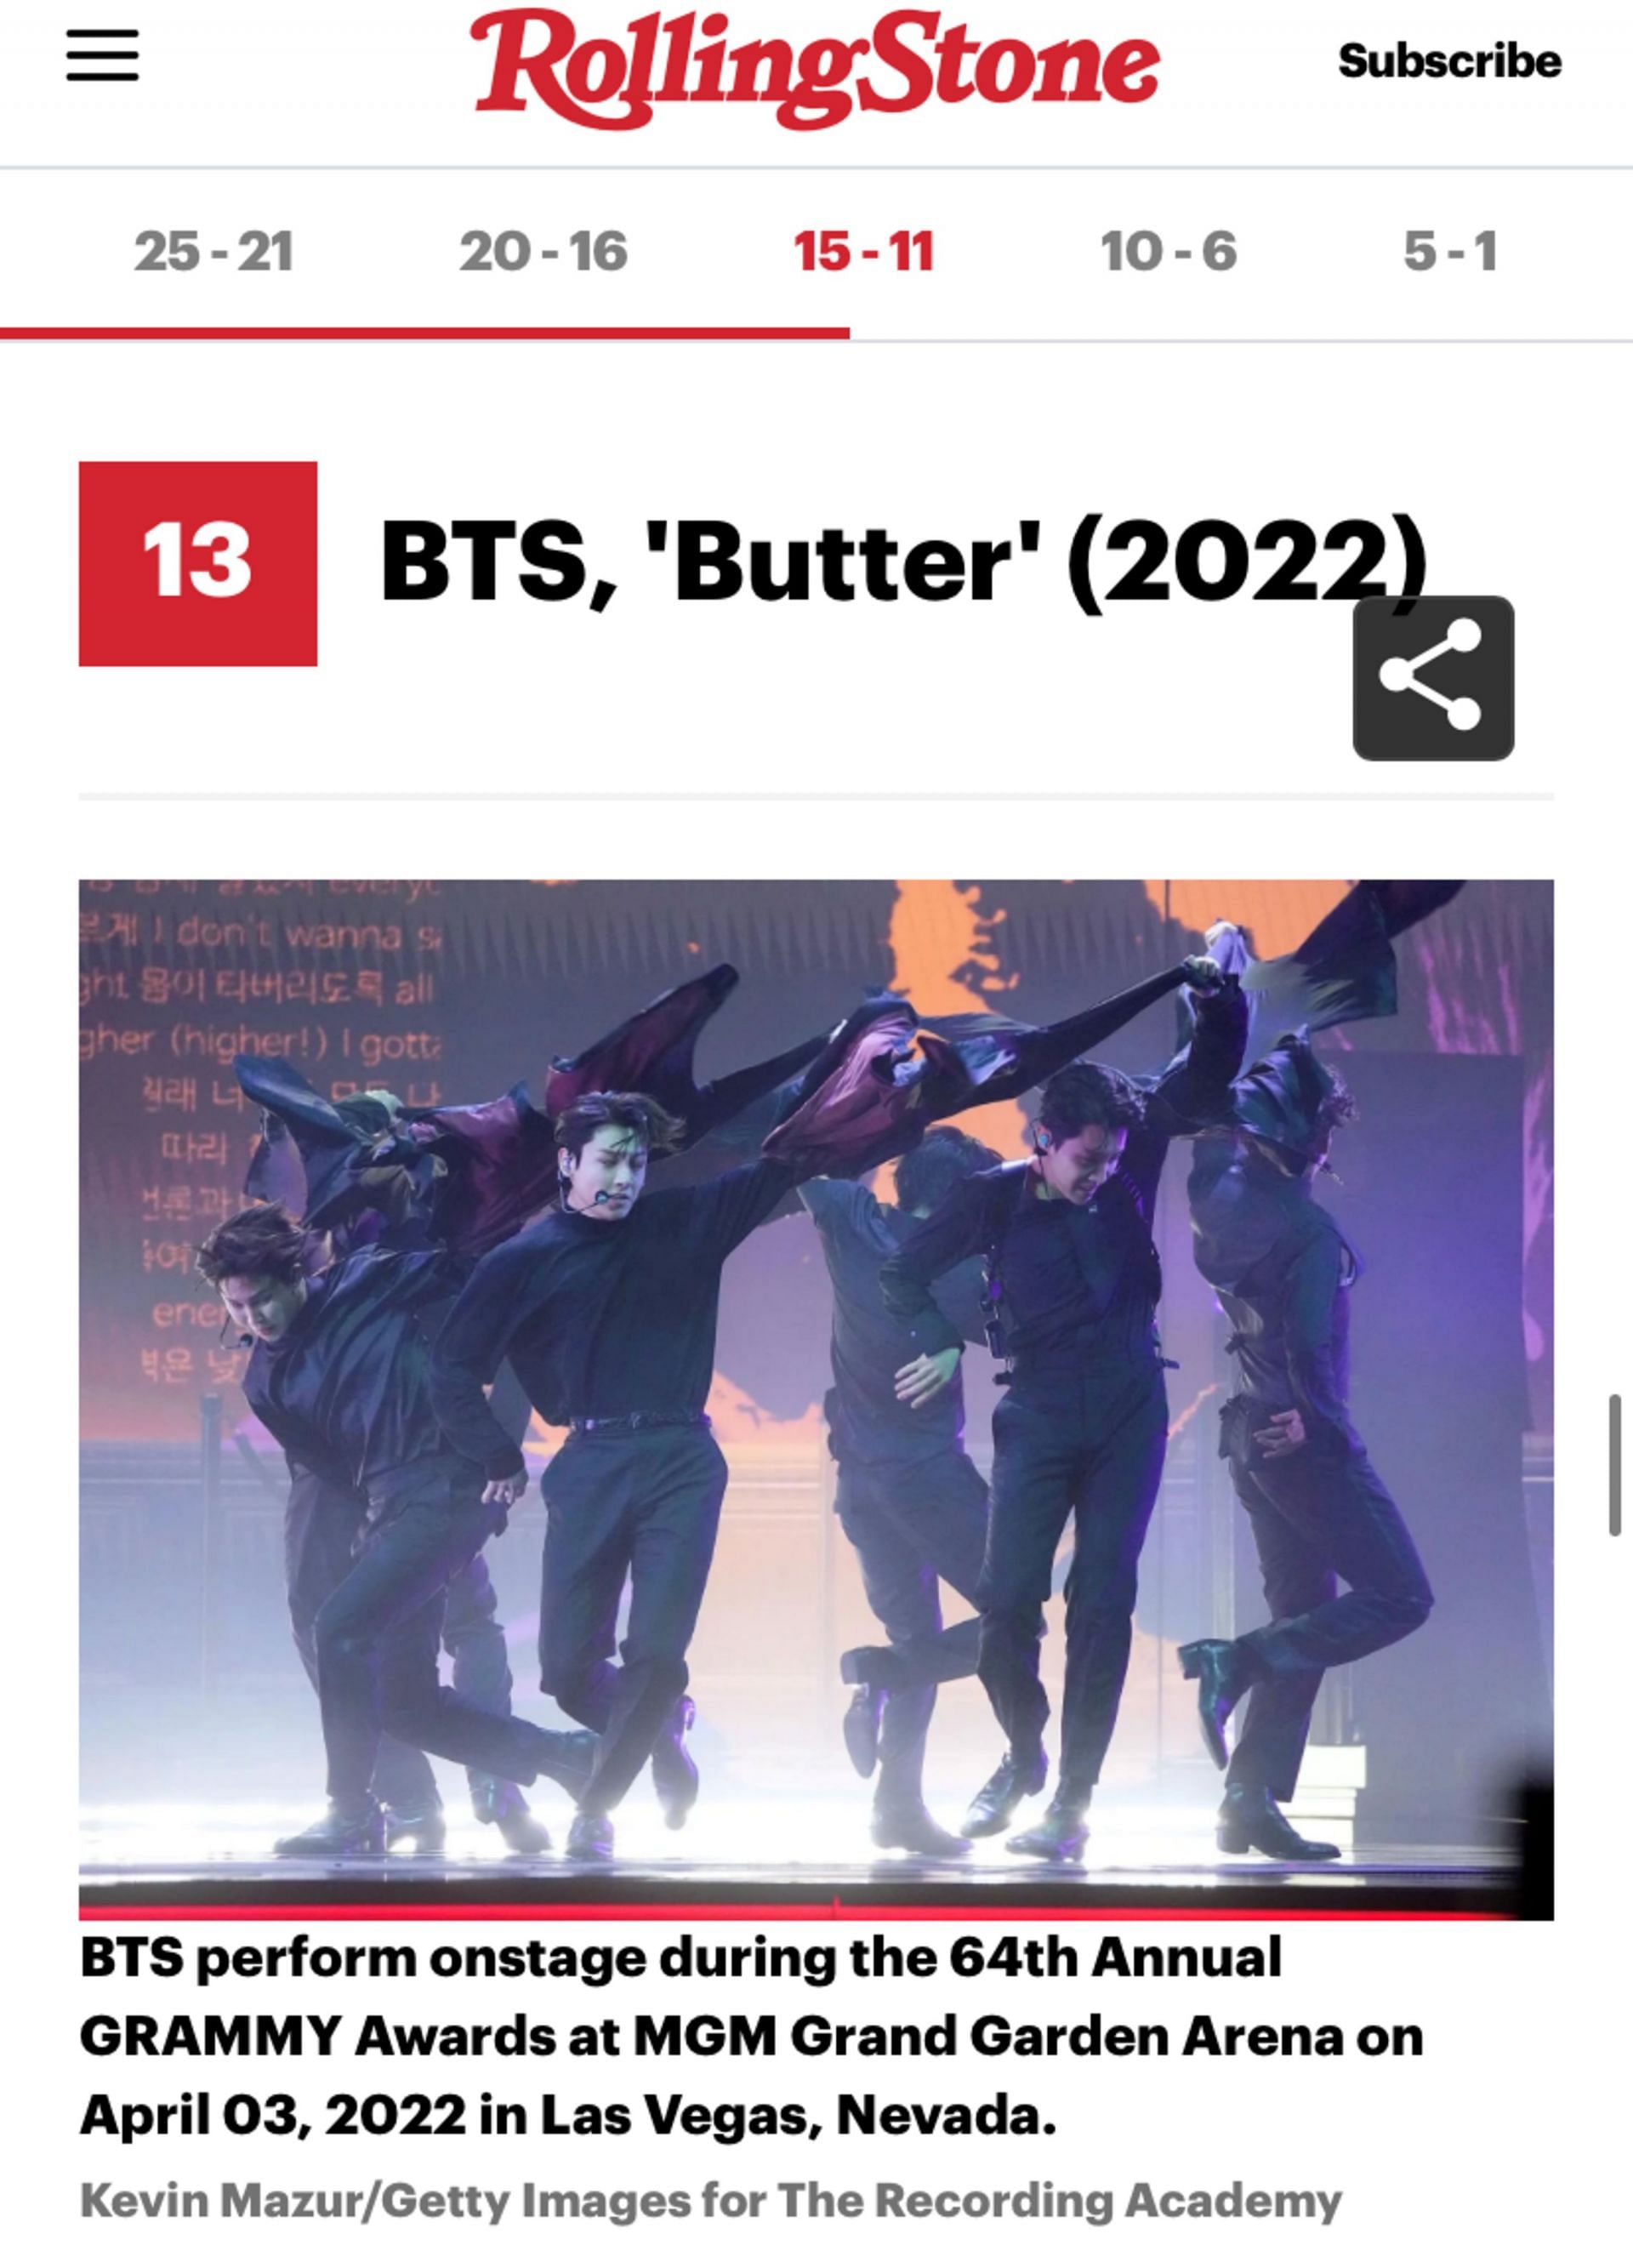 BTS Channels James Bond Vibes for 2022 Grammys Performance of 'Butter